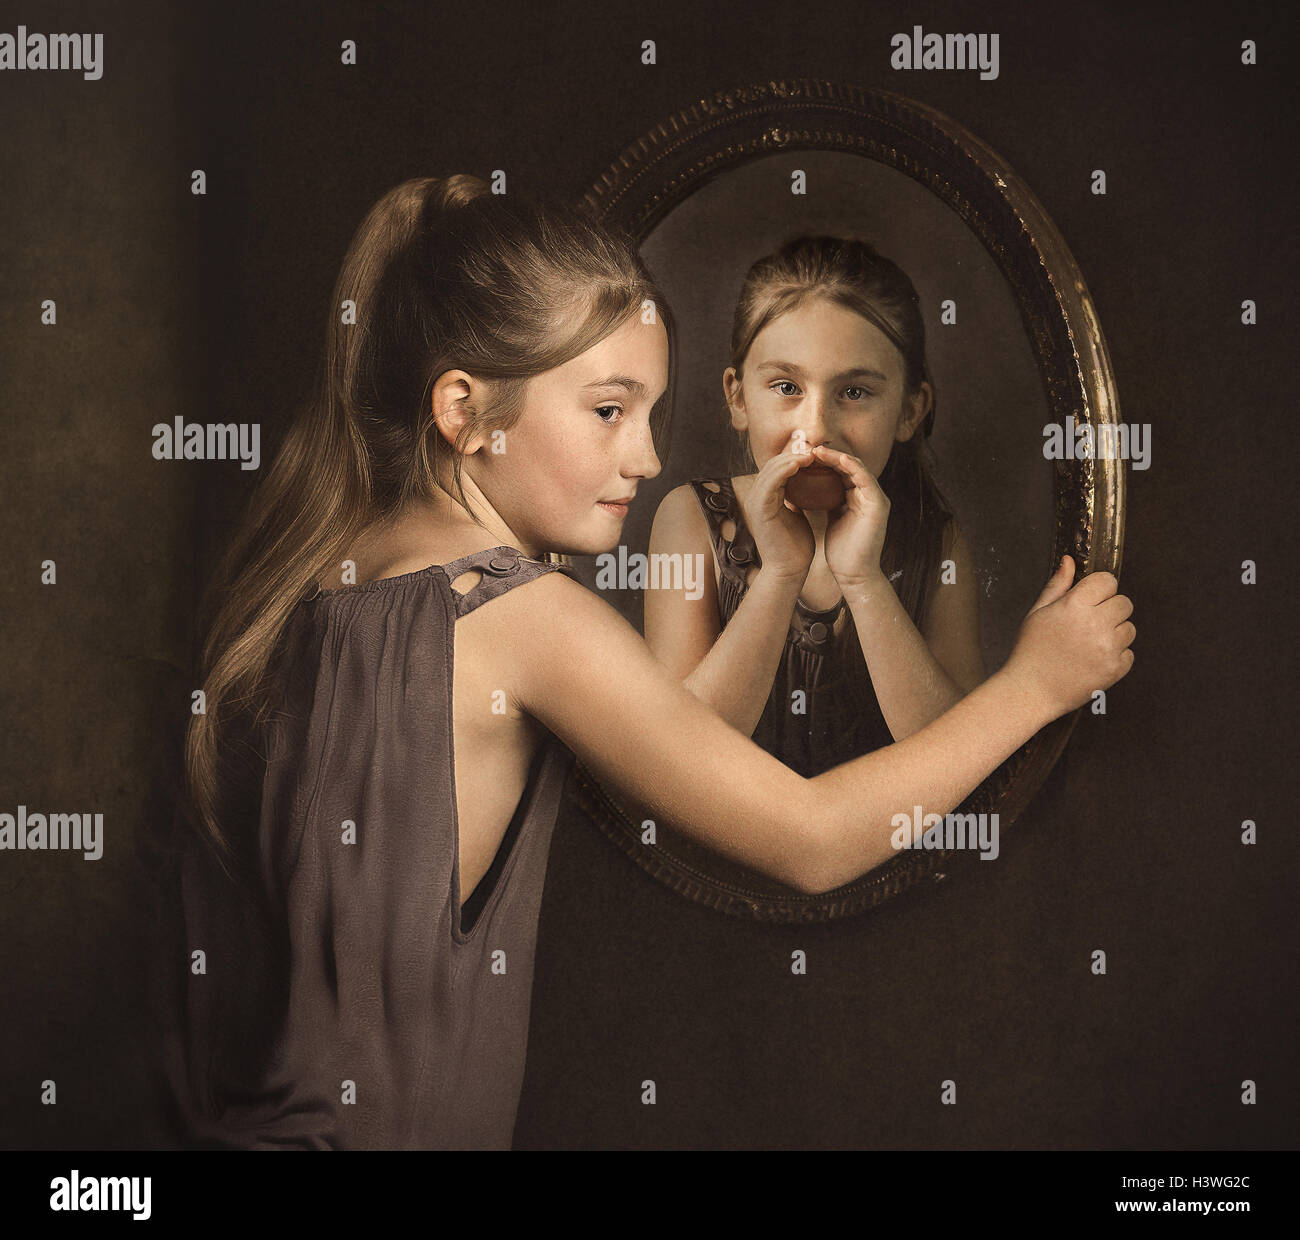 https://c8.alamy.com/comp/H3WG2C/portrait-of-a-girl-with-her-alter-ego-whispering-to-her-in-a-mirror-H3WG2C.jpg